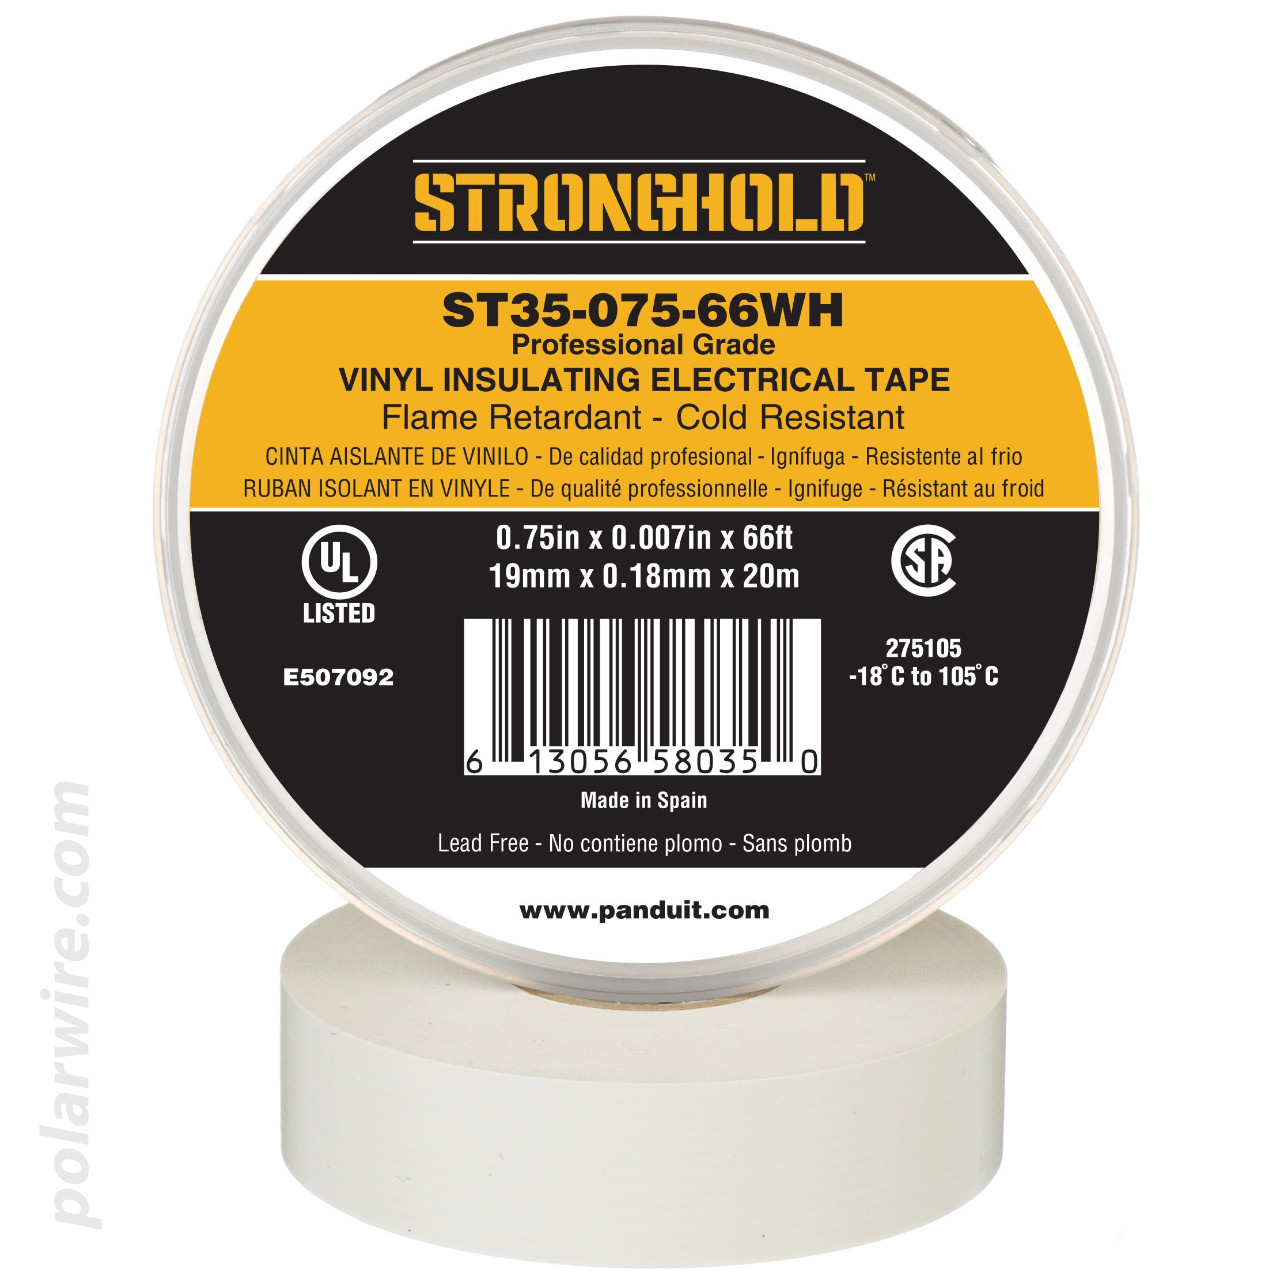 3/4 inch White PVC Vinyl Professional Grade Electrical Tape Panduit Stronghold